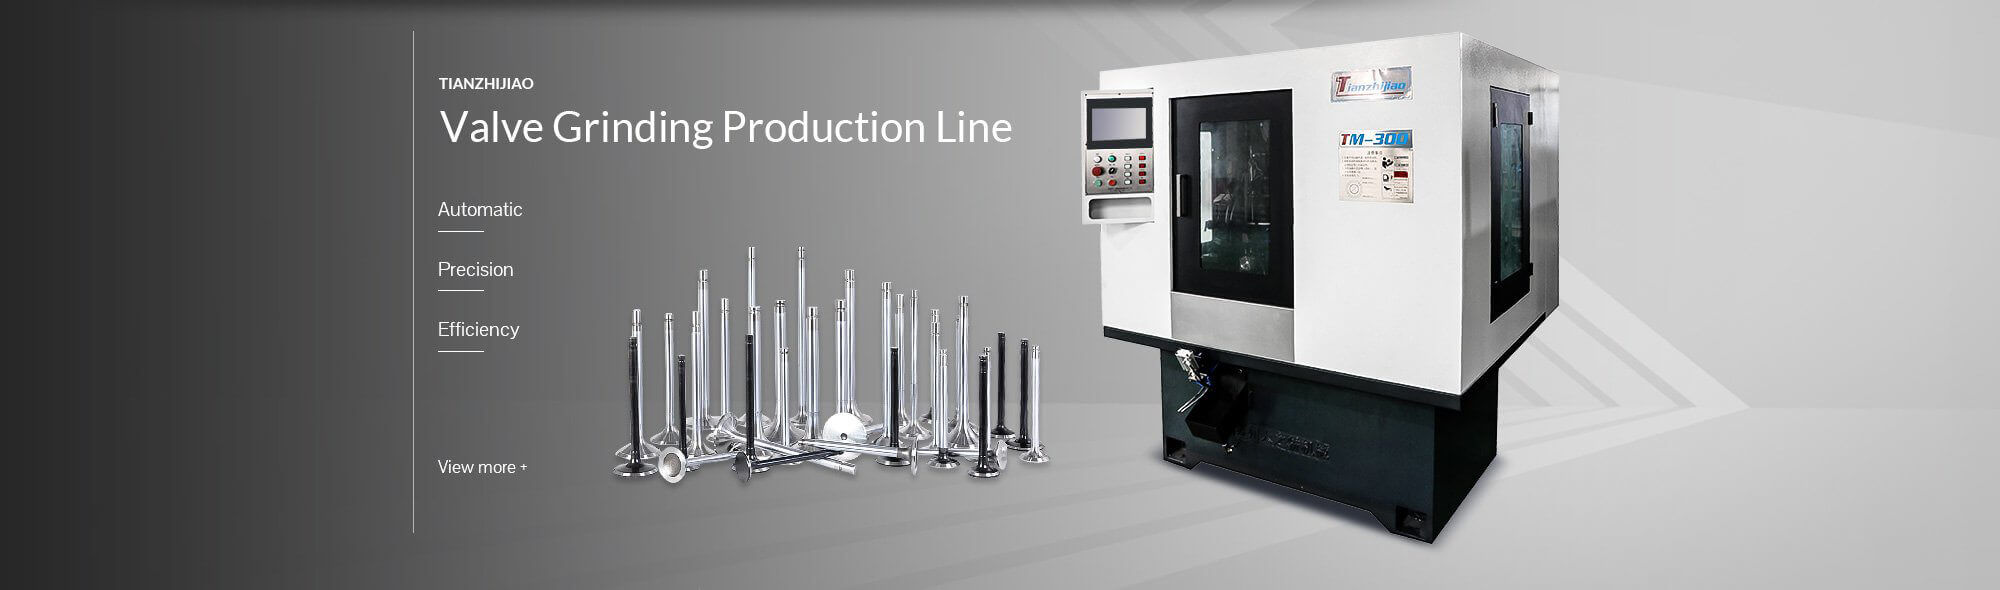 Valve Grinding Production Line